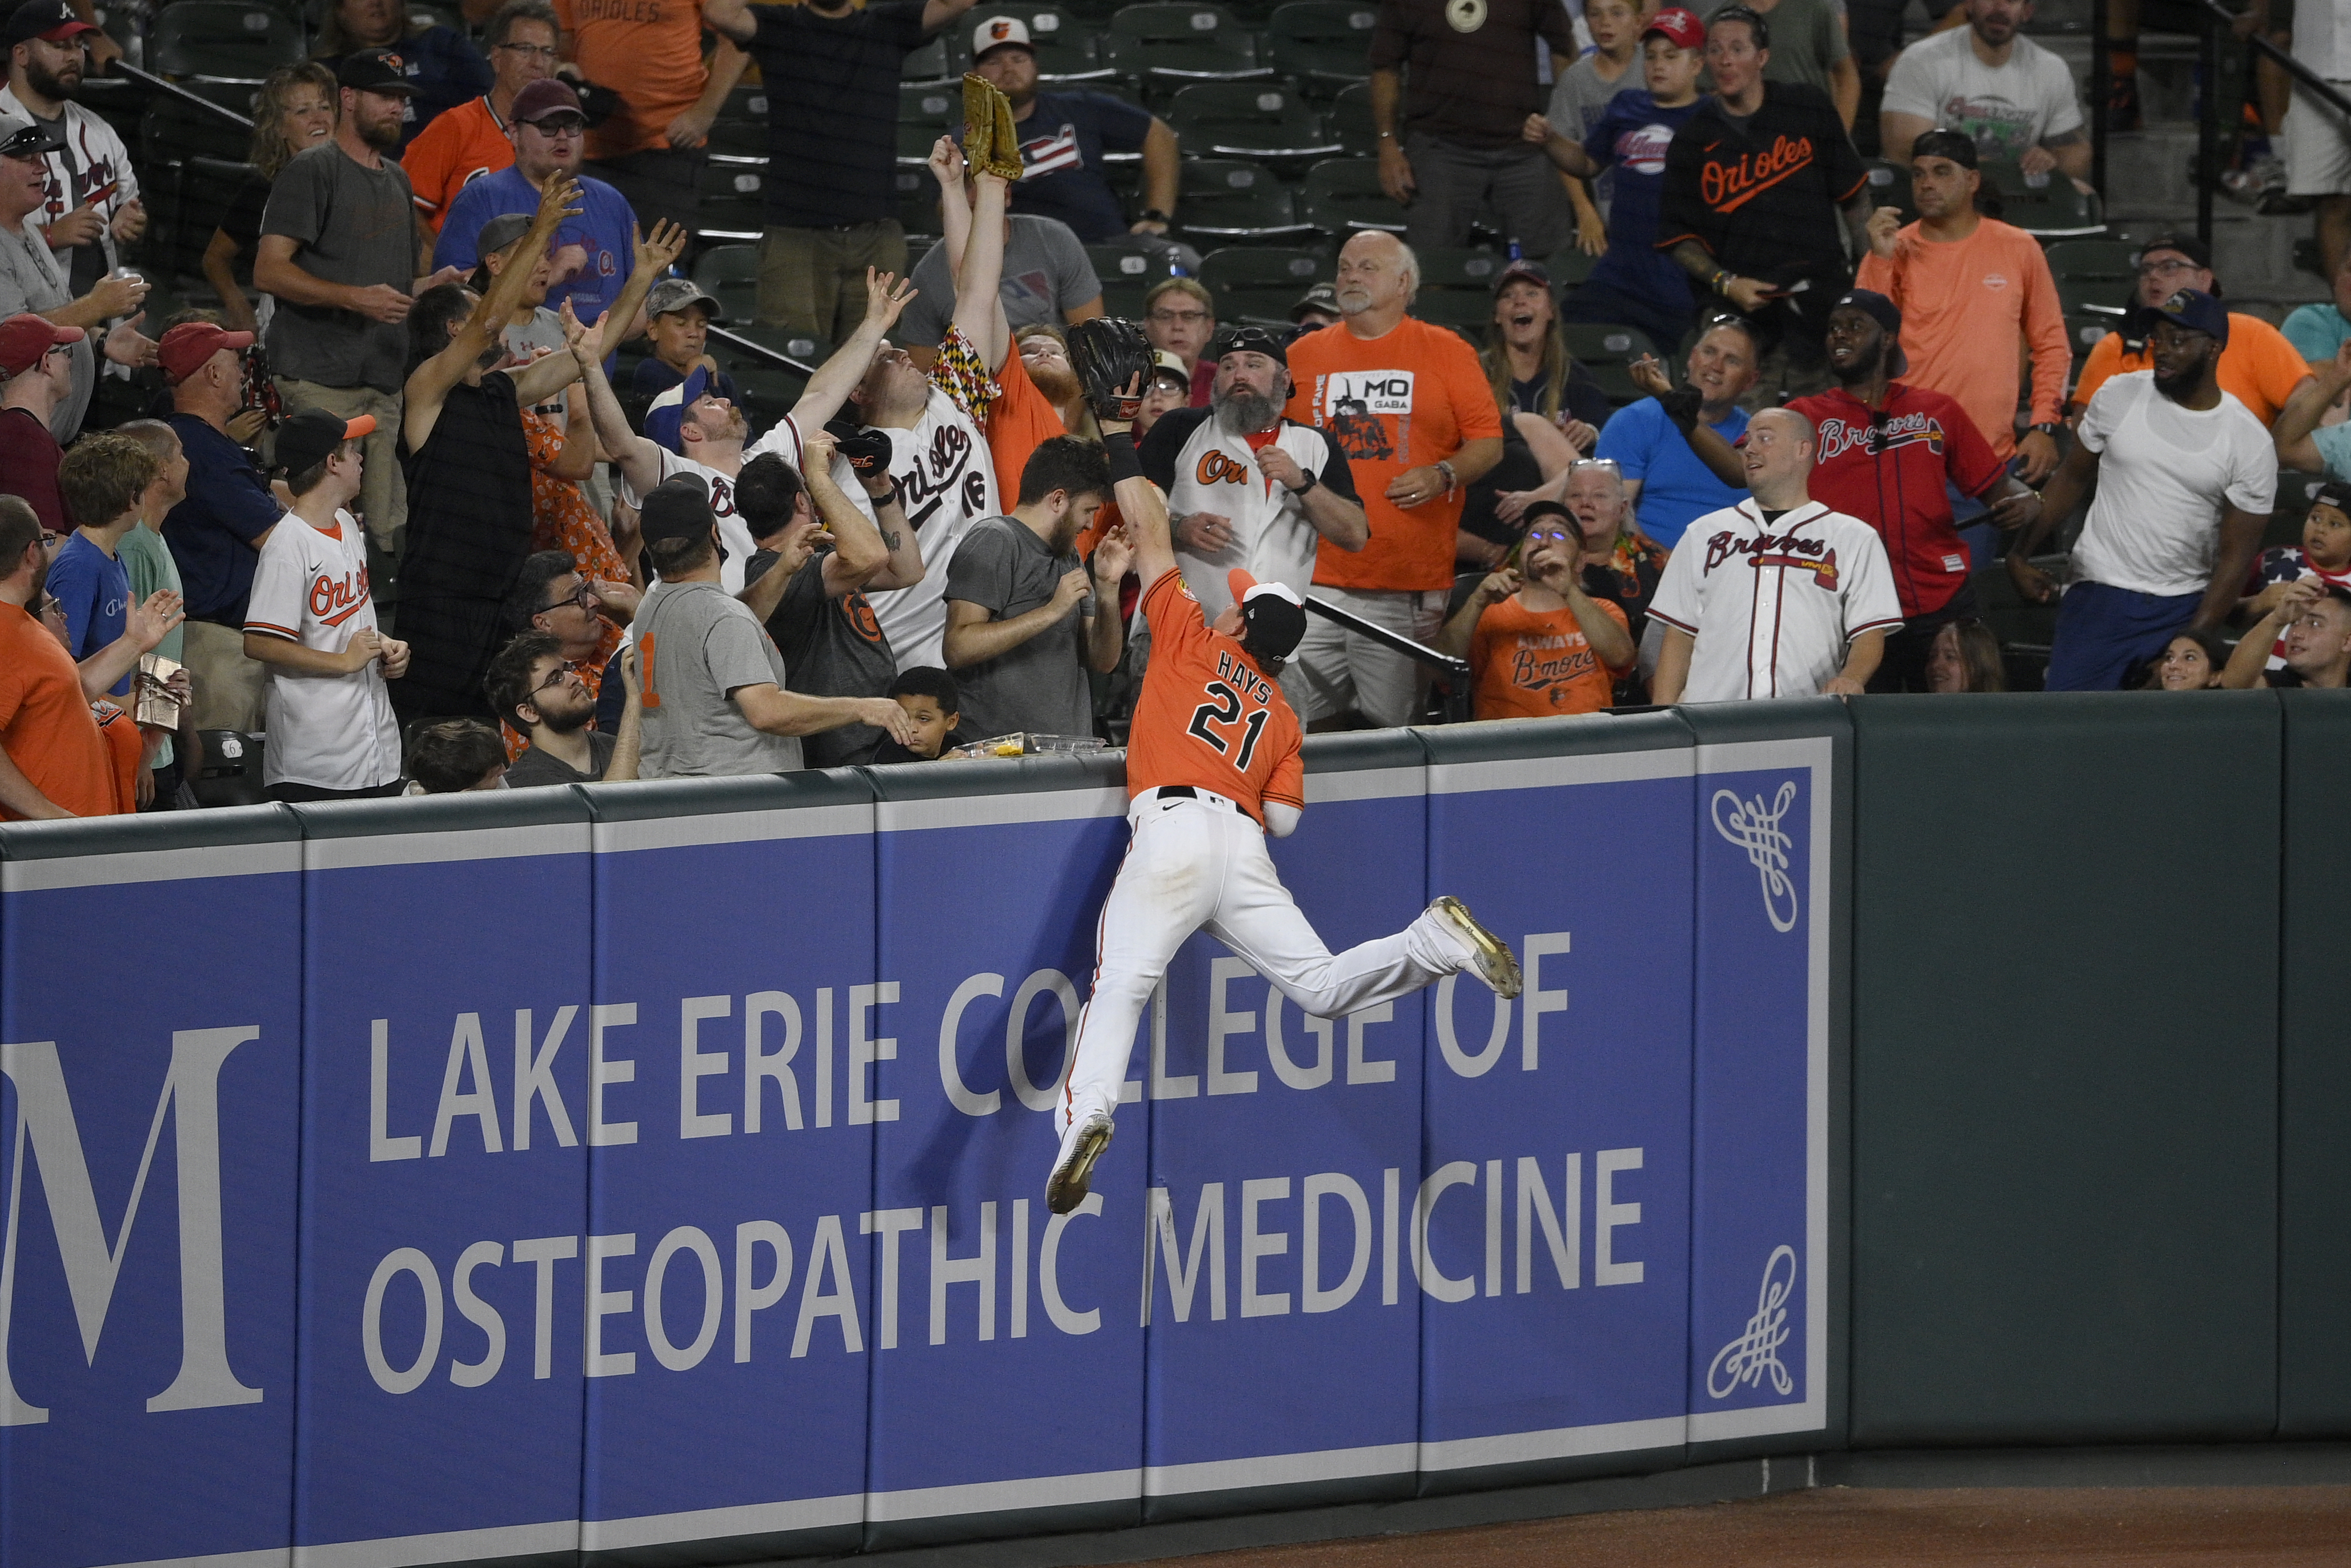 Why Baltimore Orioles' Camden Yards may see fewer home runs this year